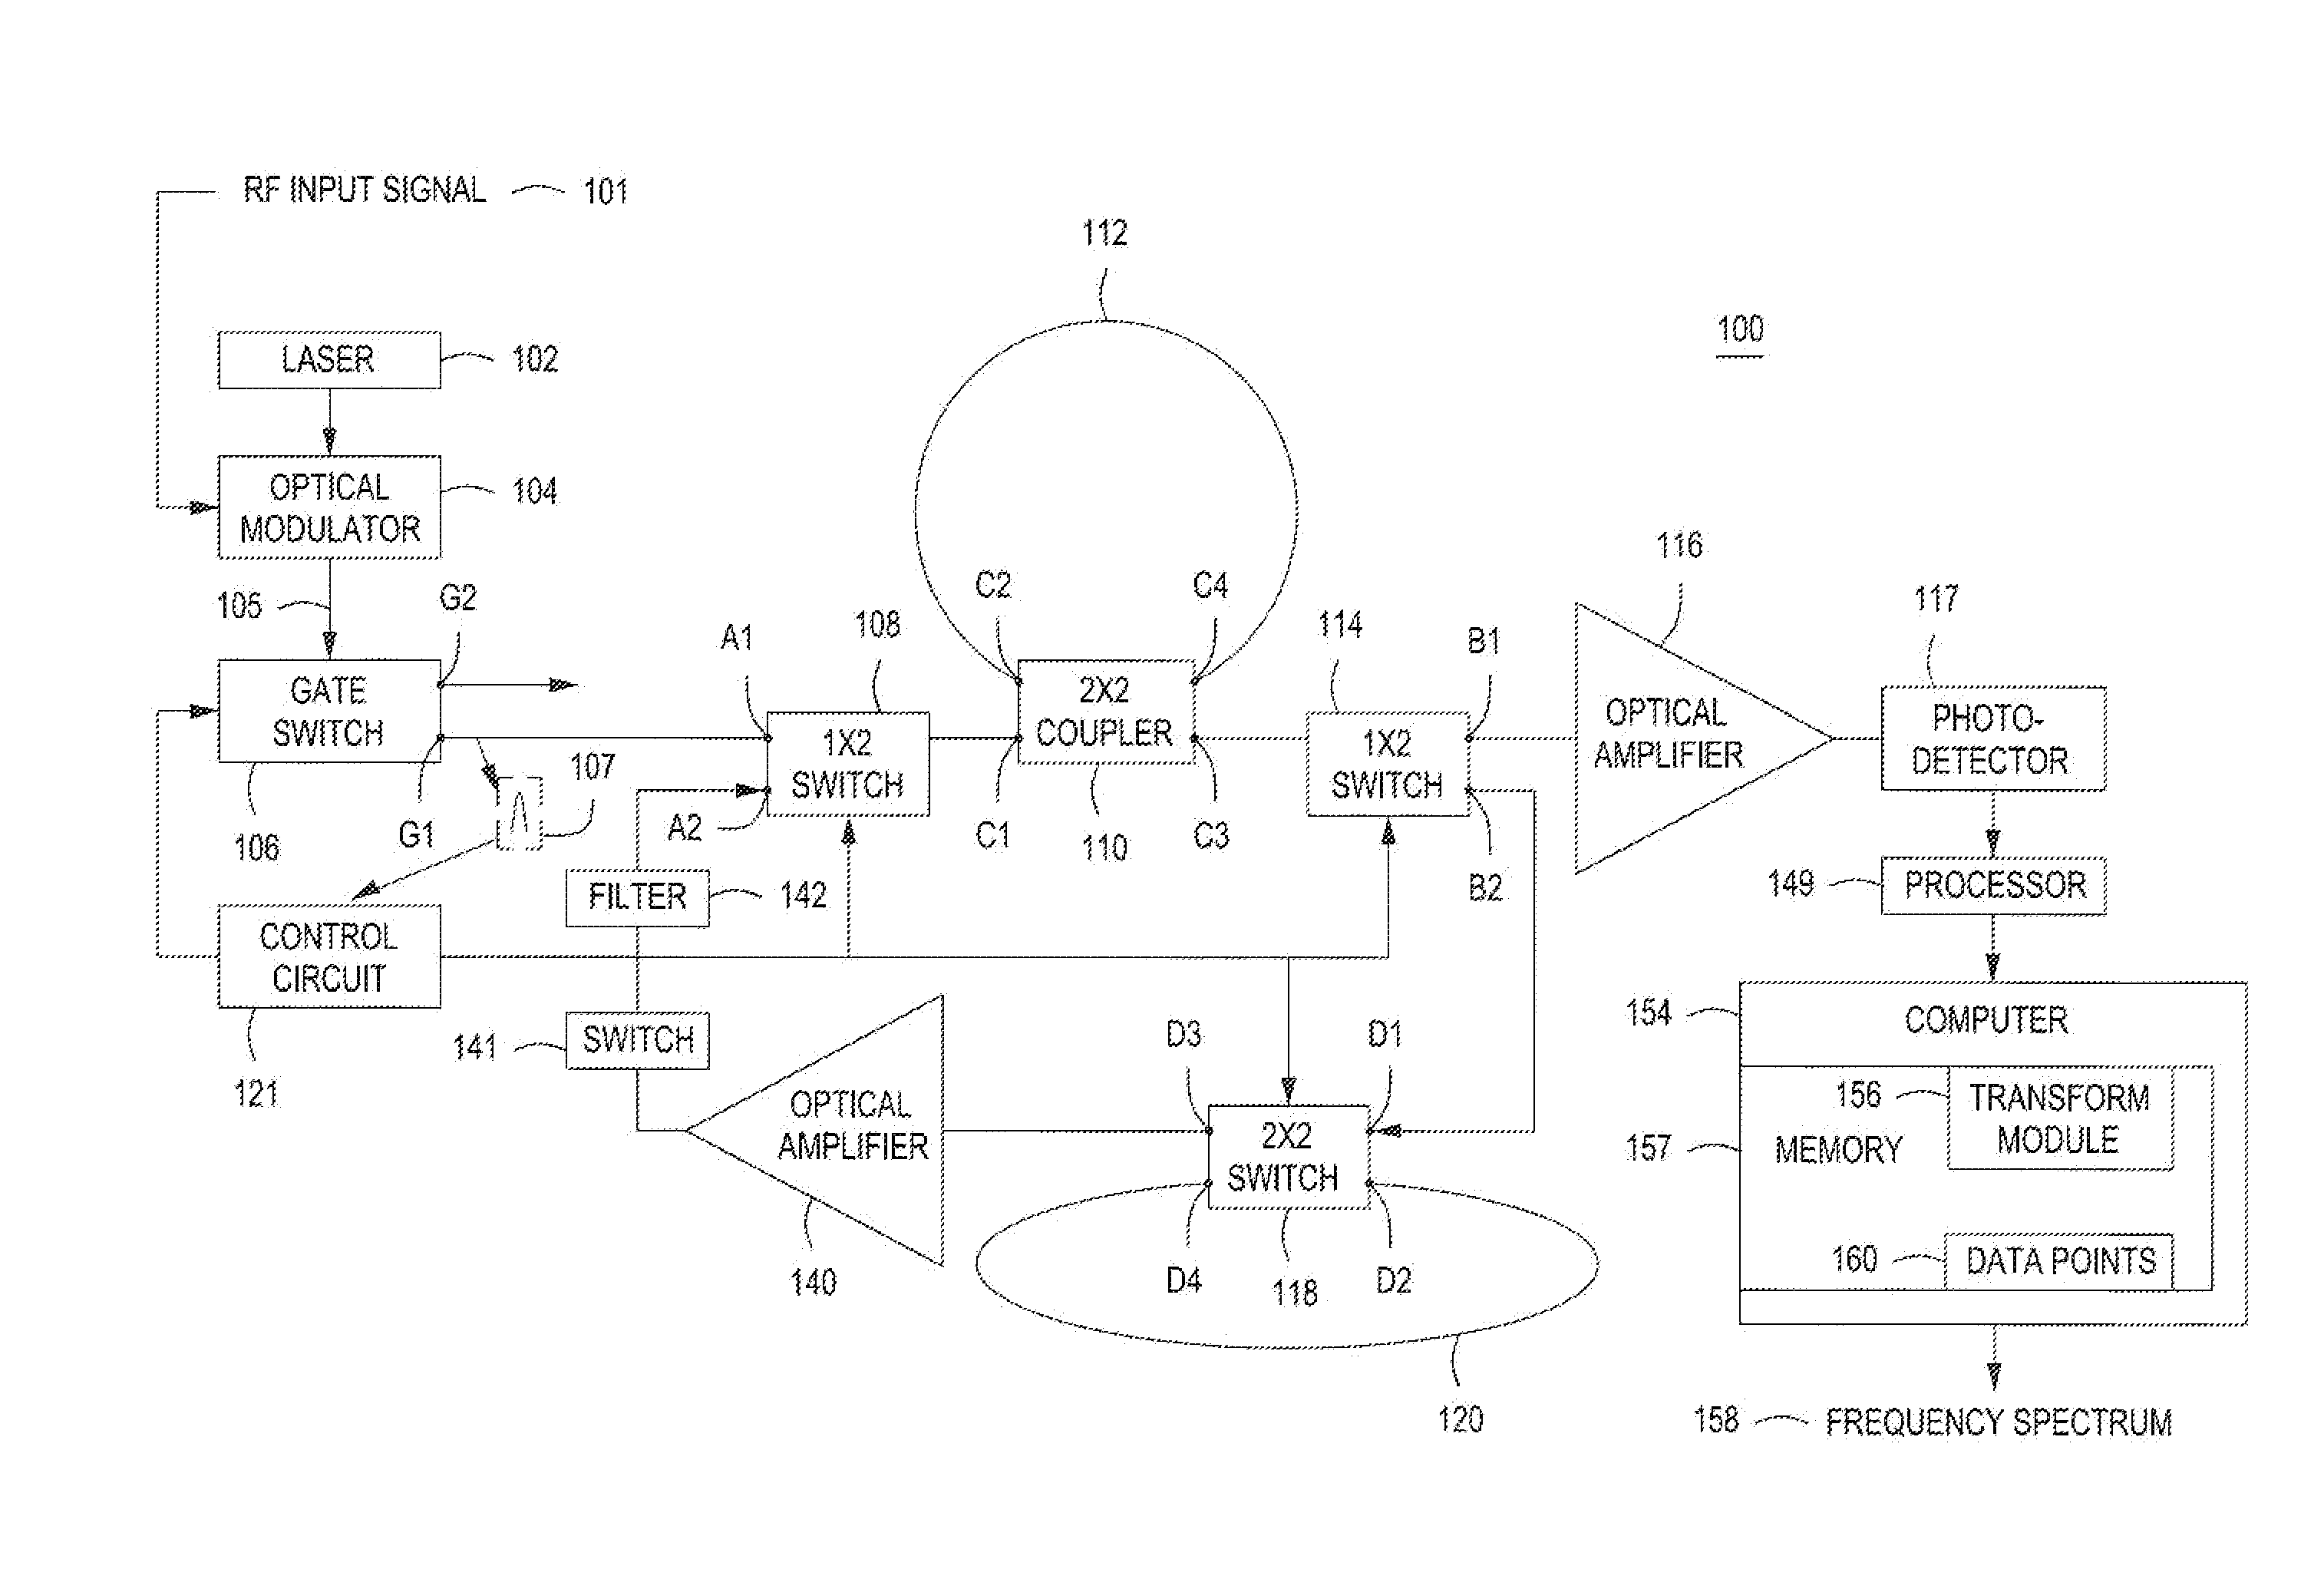 Method and Apparatus for Analyzing the Spectrum of Radio-Frequency Signals Using Unamplified Fiber Optic Recirculation Loops